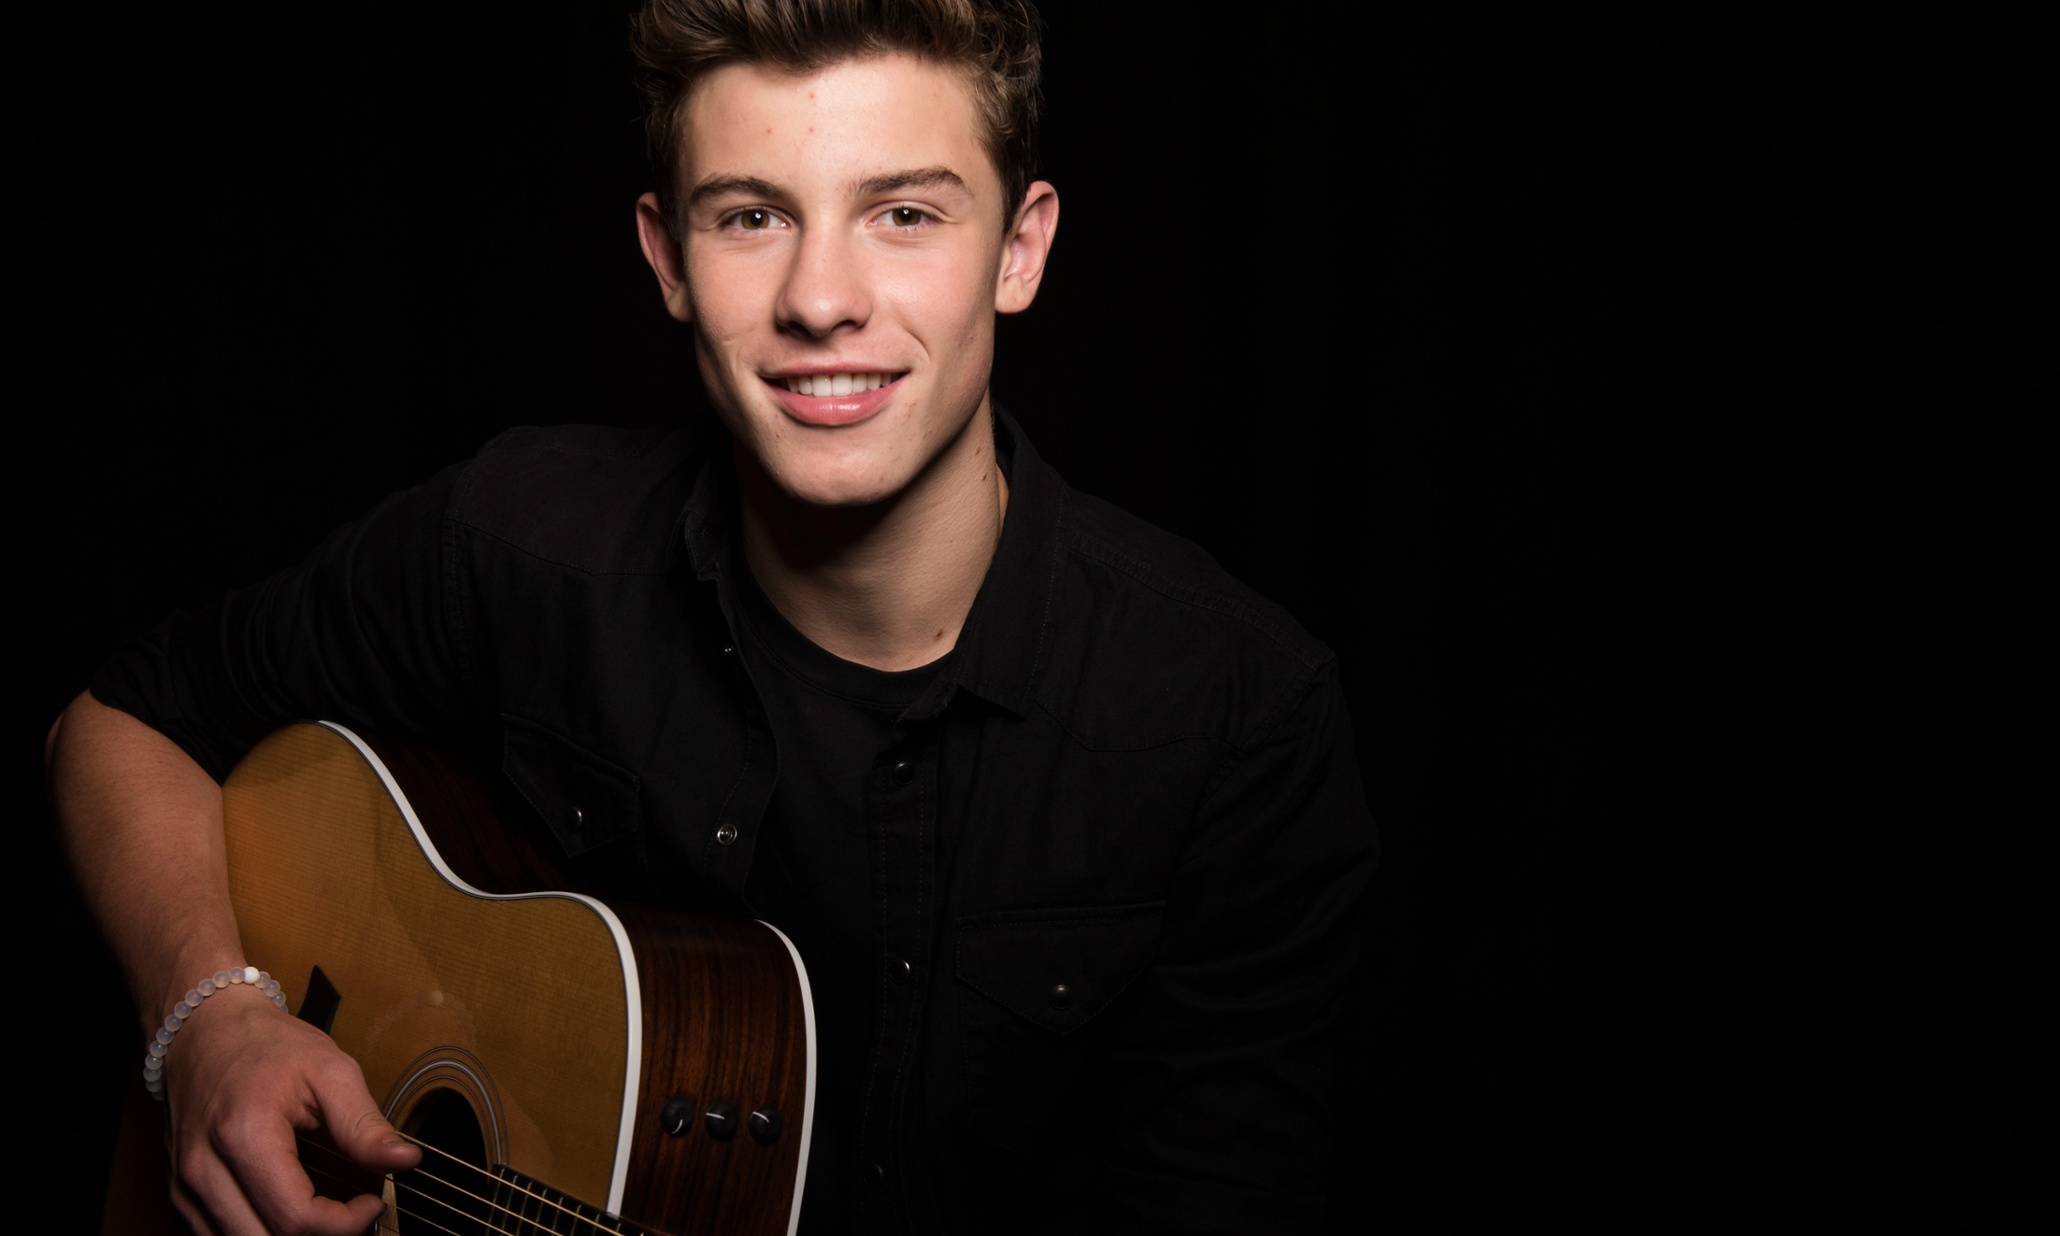 Shawn Mendes Singer Hd Wallpaper 56310 58062 Hd Wallpapers - Shawn Mendes Life Of The Party Album Cover , HD Wallpaper & Backgrounds